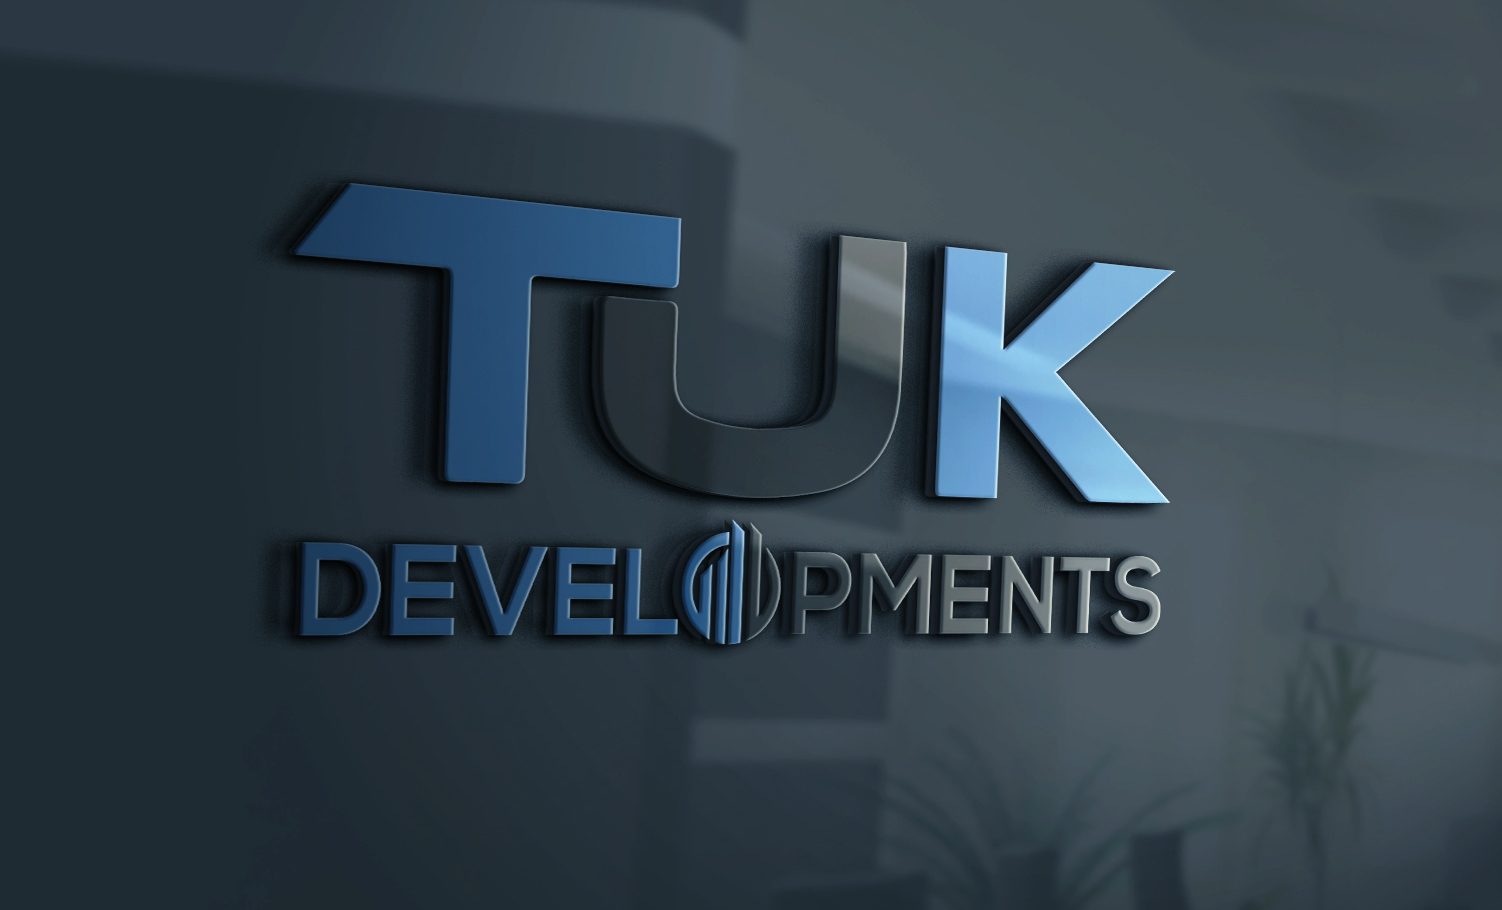 TUK Developments is revolutionizing the real estate space with its home acquisitions